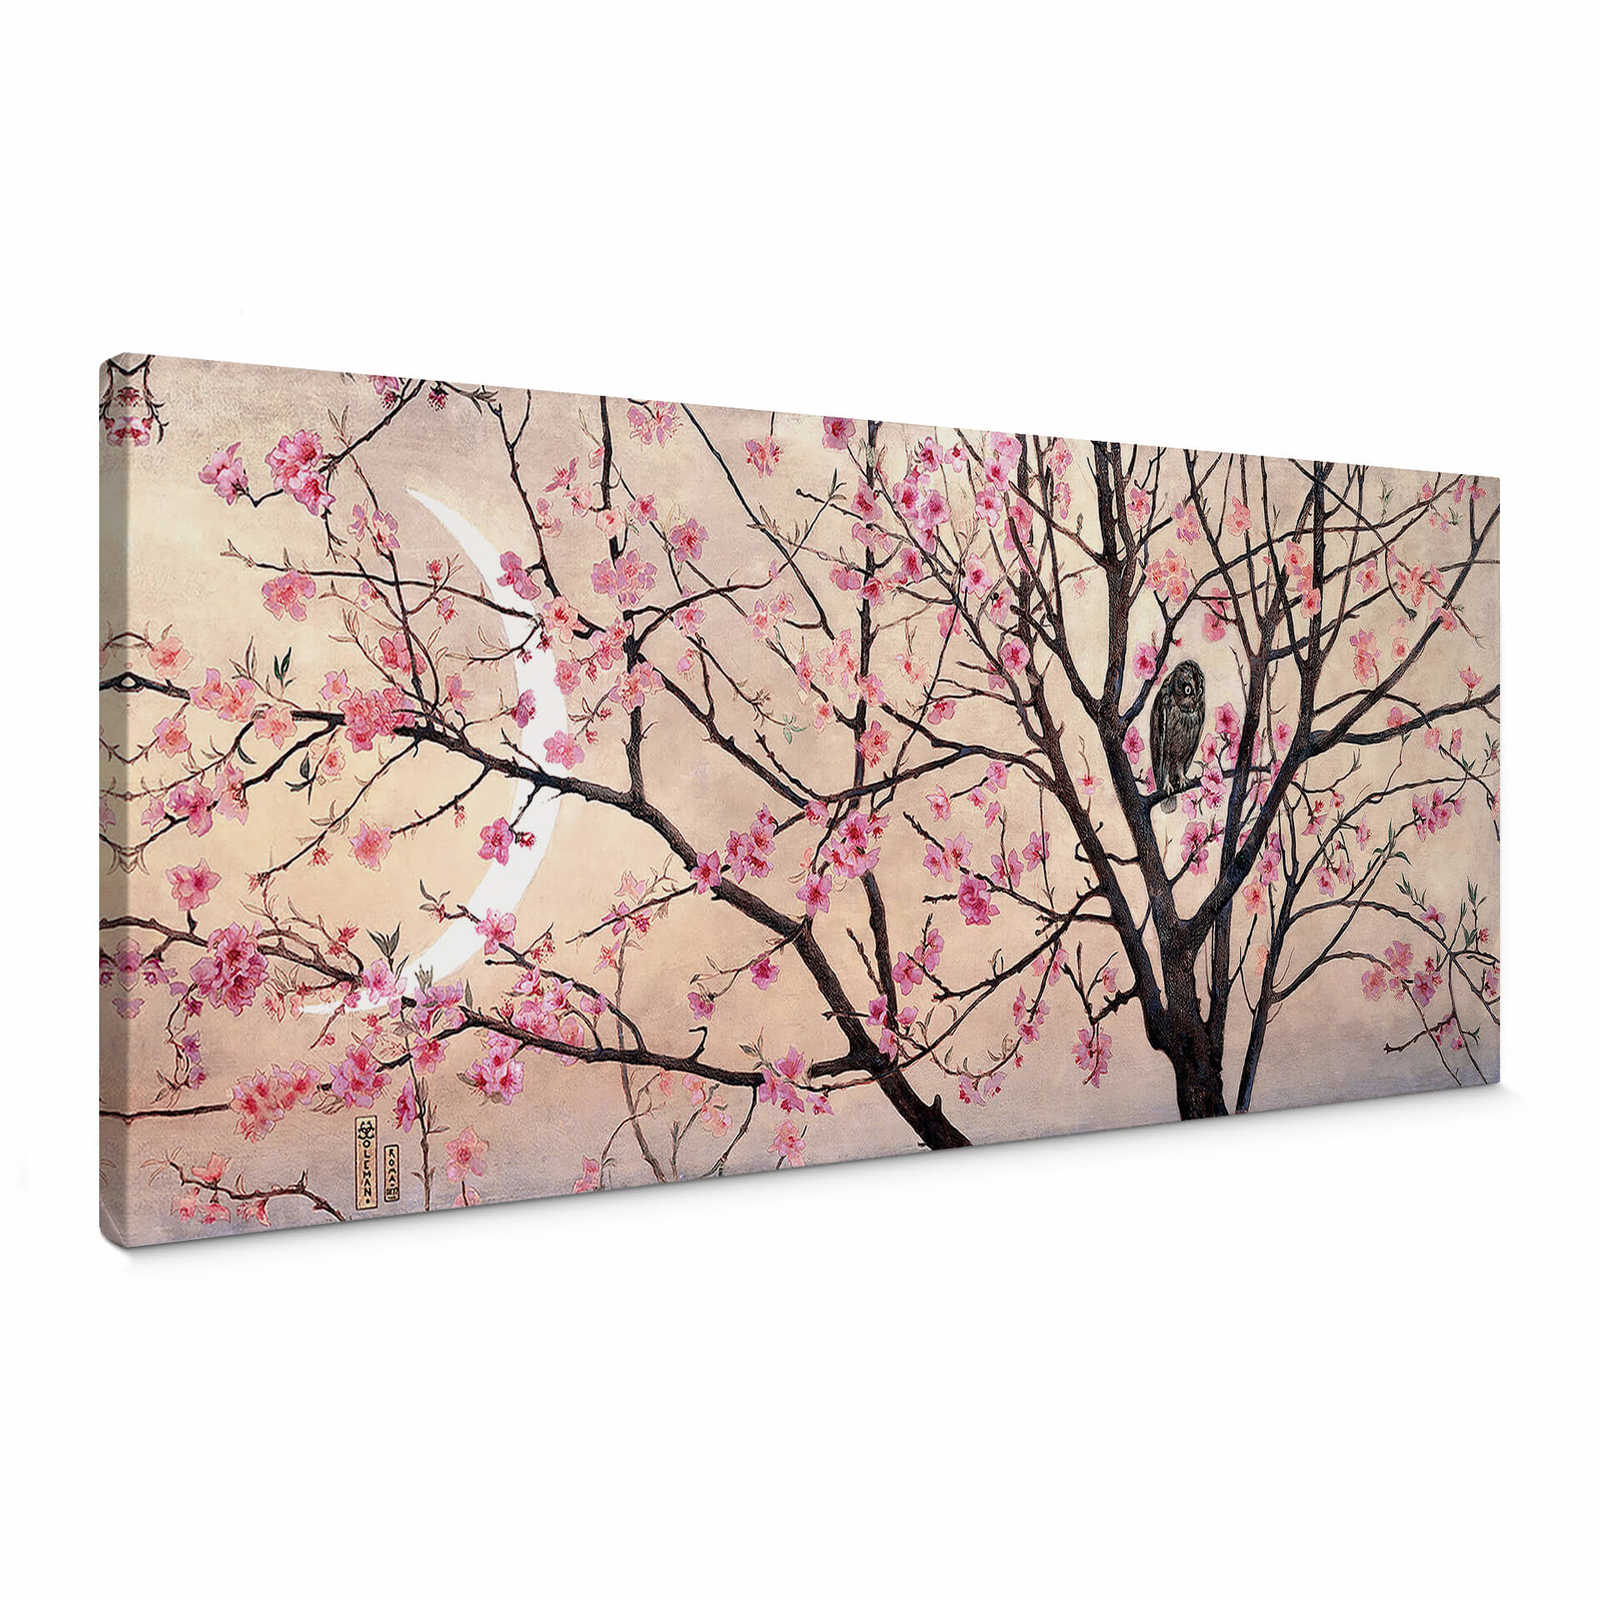         Canvas picture of cherry blossom tree with owl
    